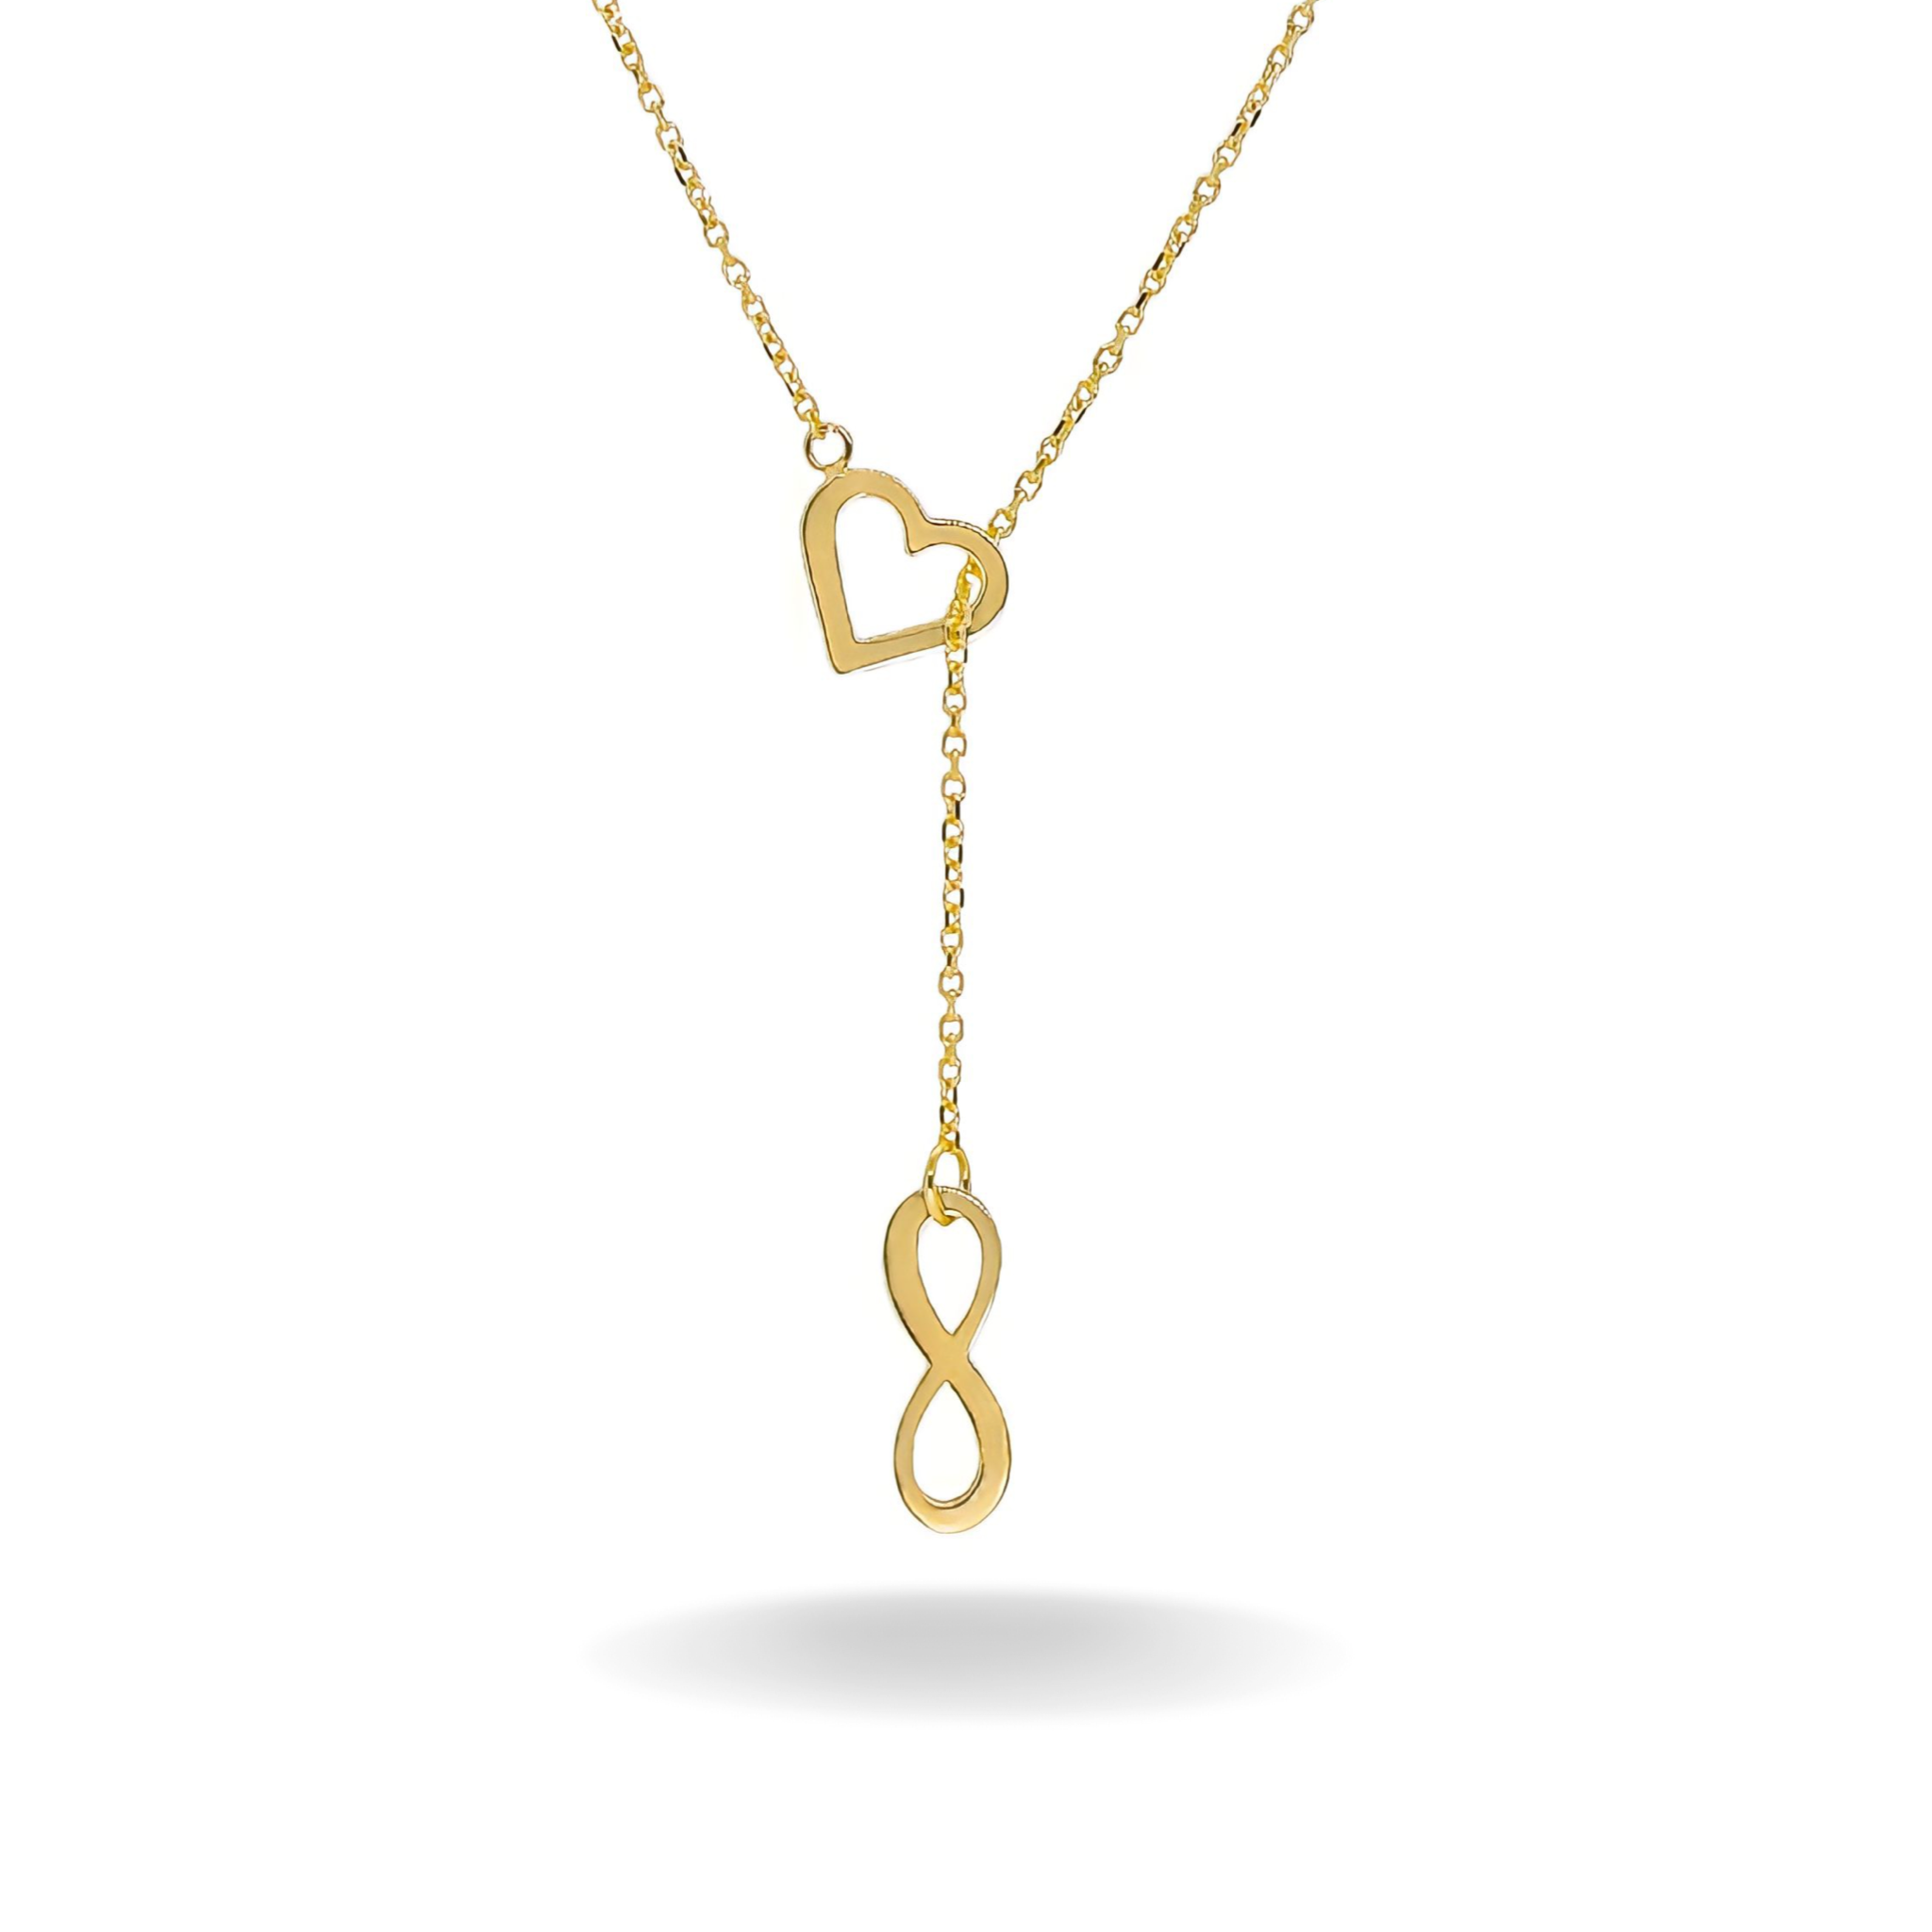 14K YELLOW GOLD FOREVER LOVE LARIAT NECKLACE